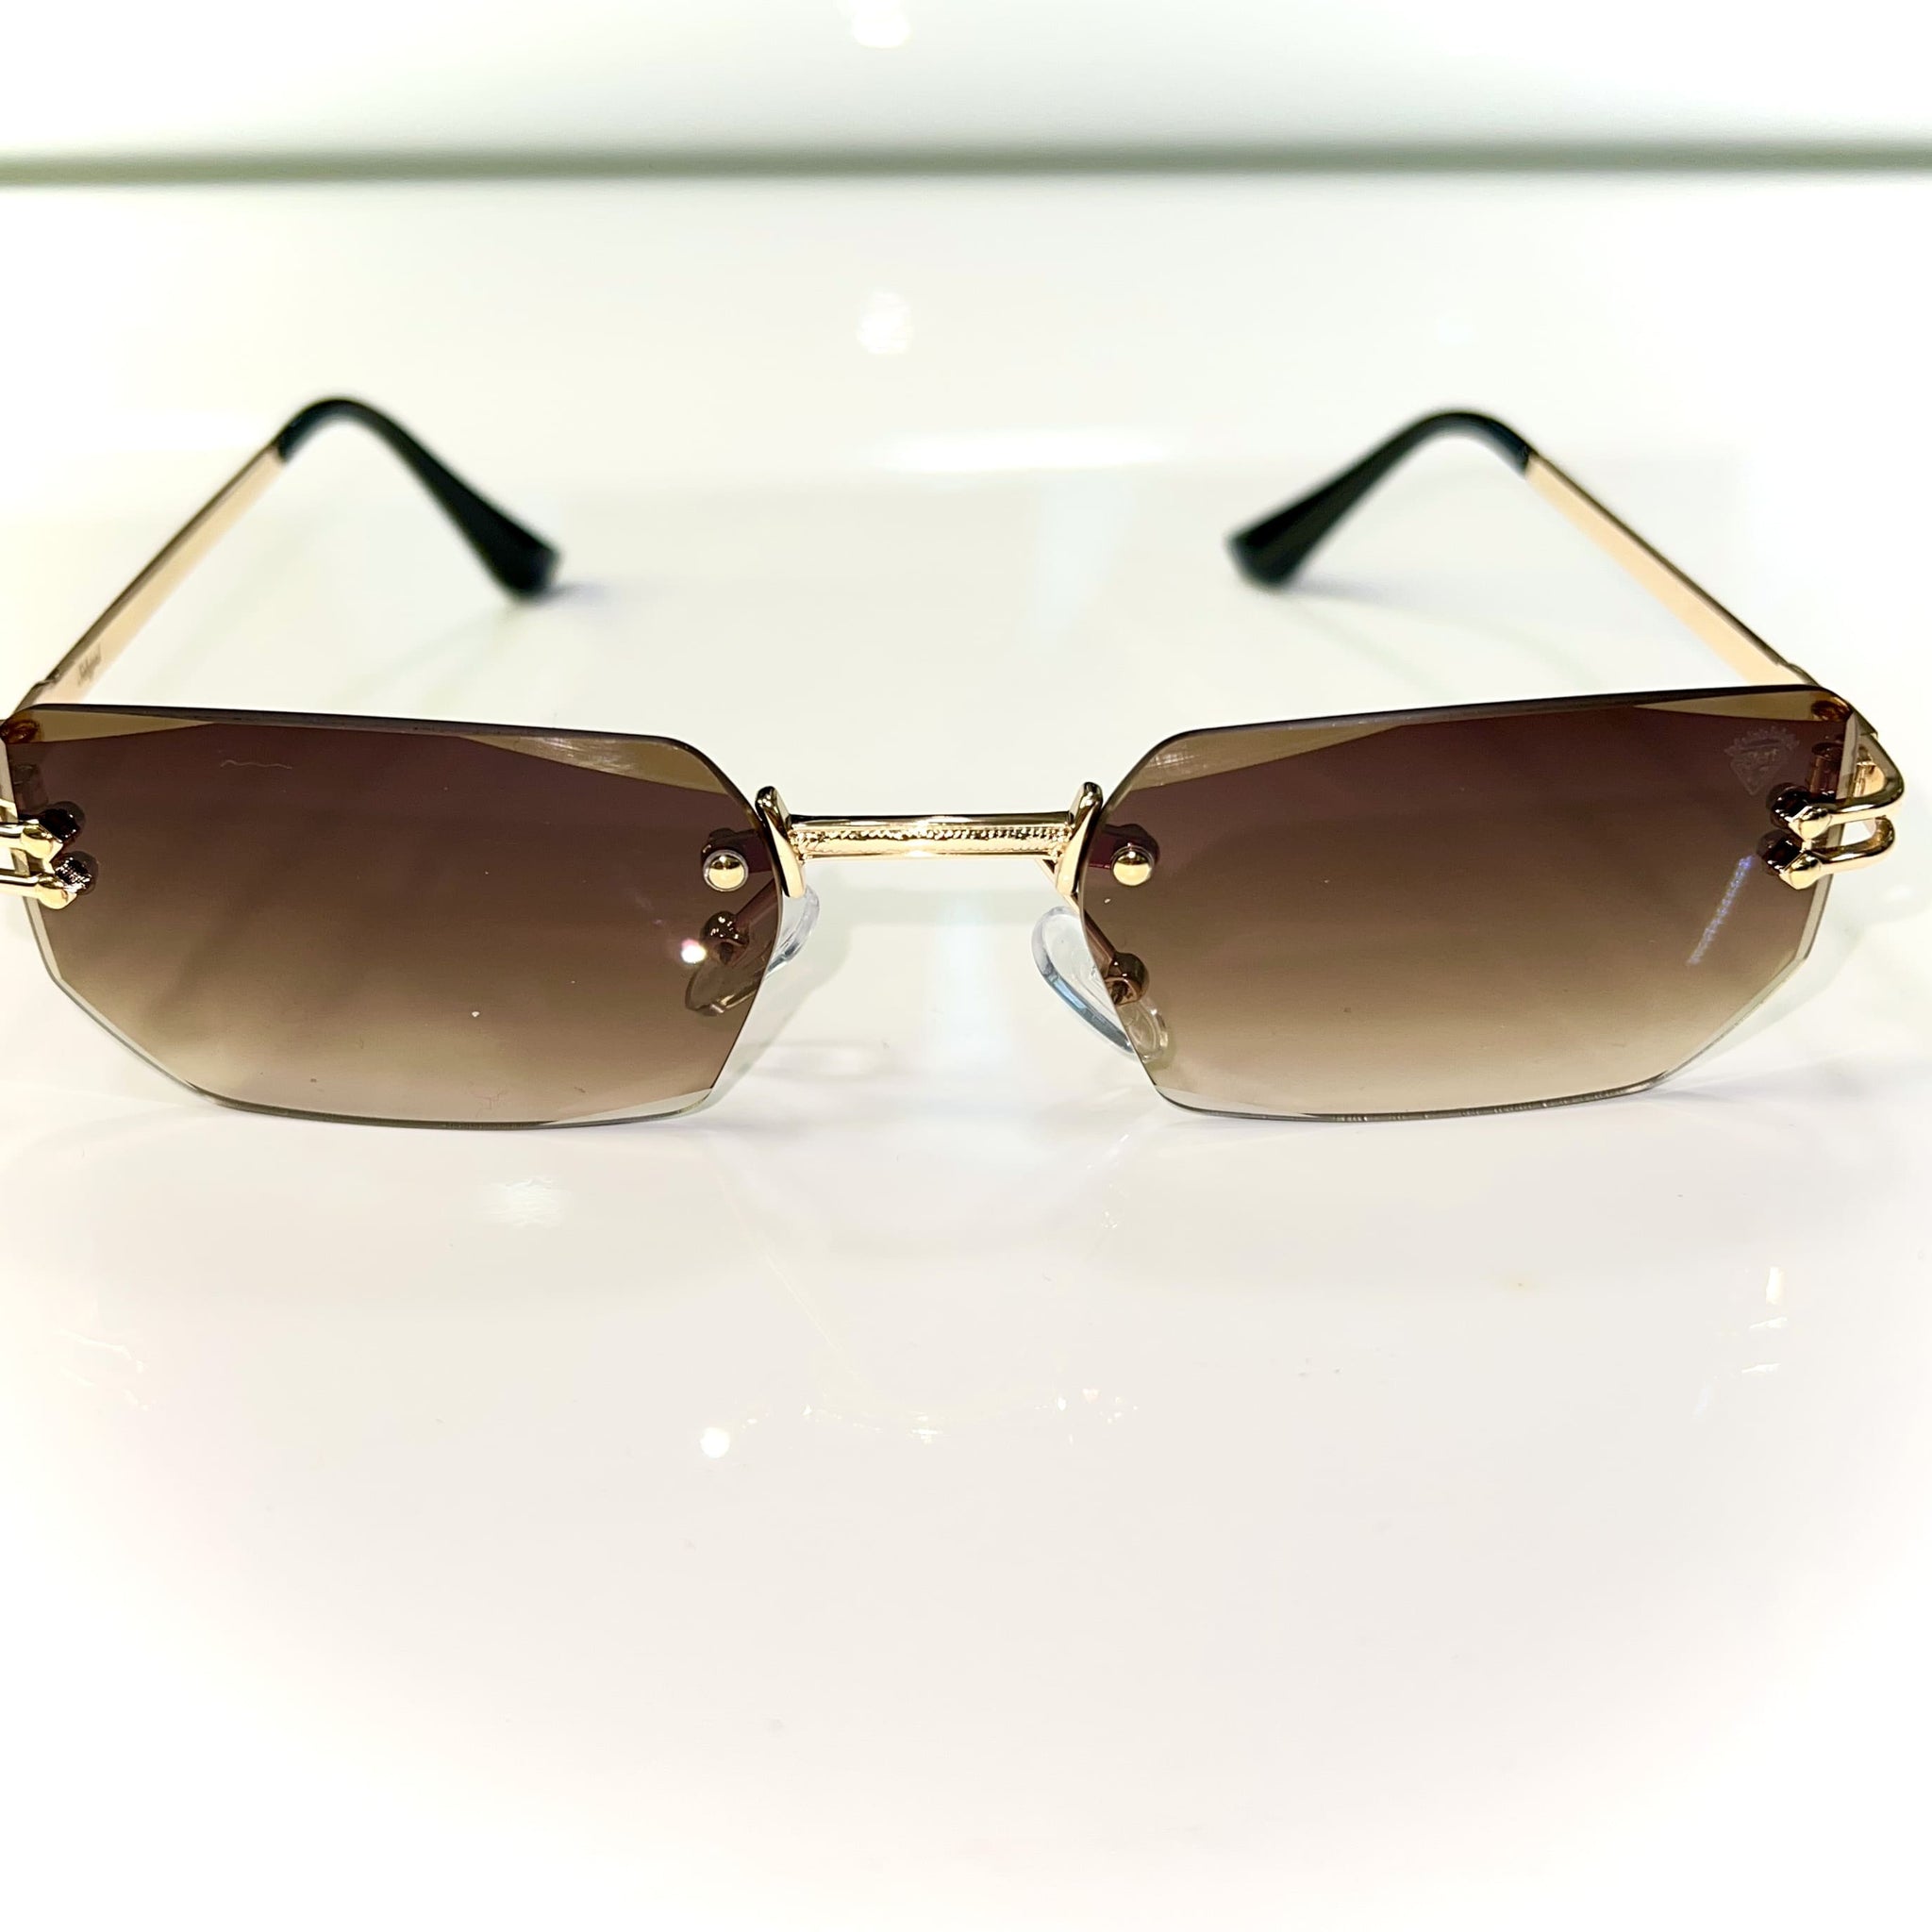 Rich Glasses - 14k gold plated - Diamond Cut - Brown Shade - Sehgal Glasses